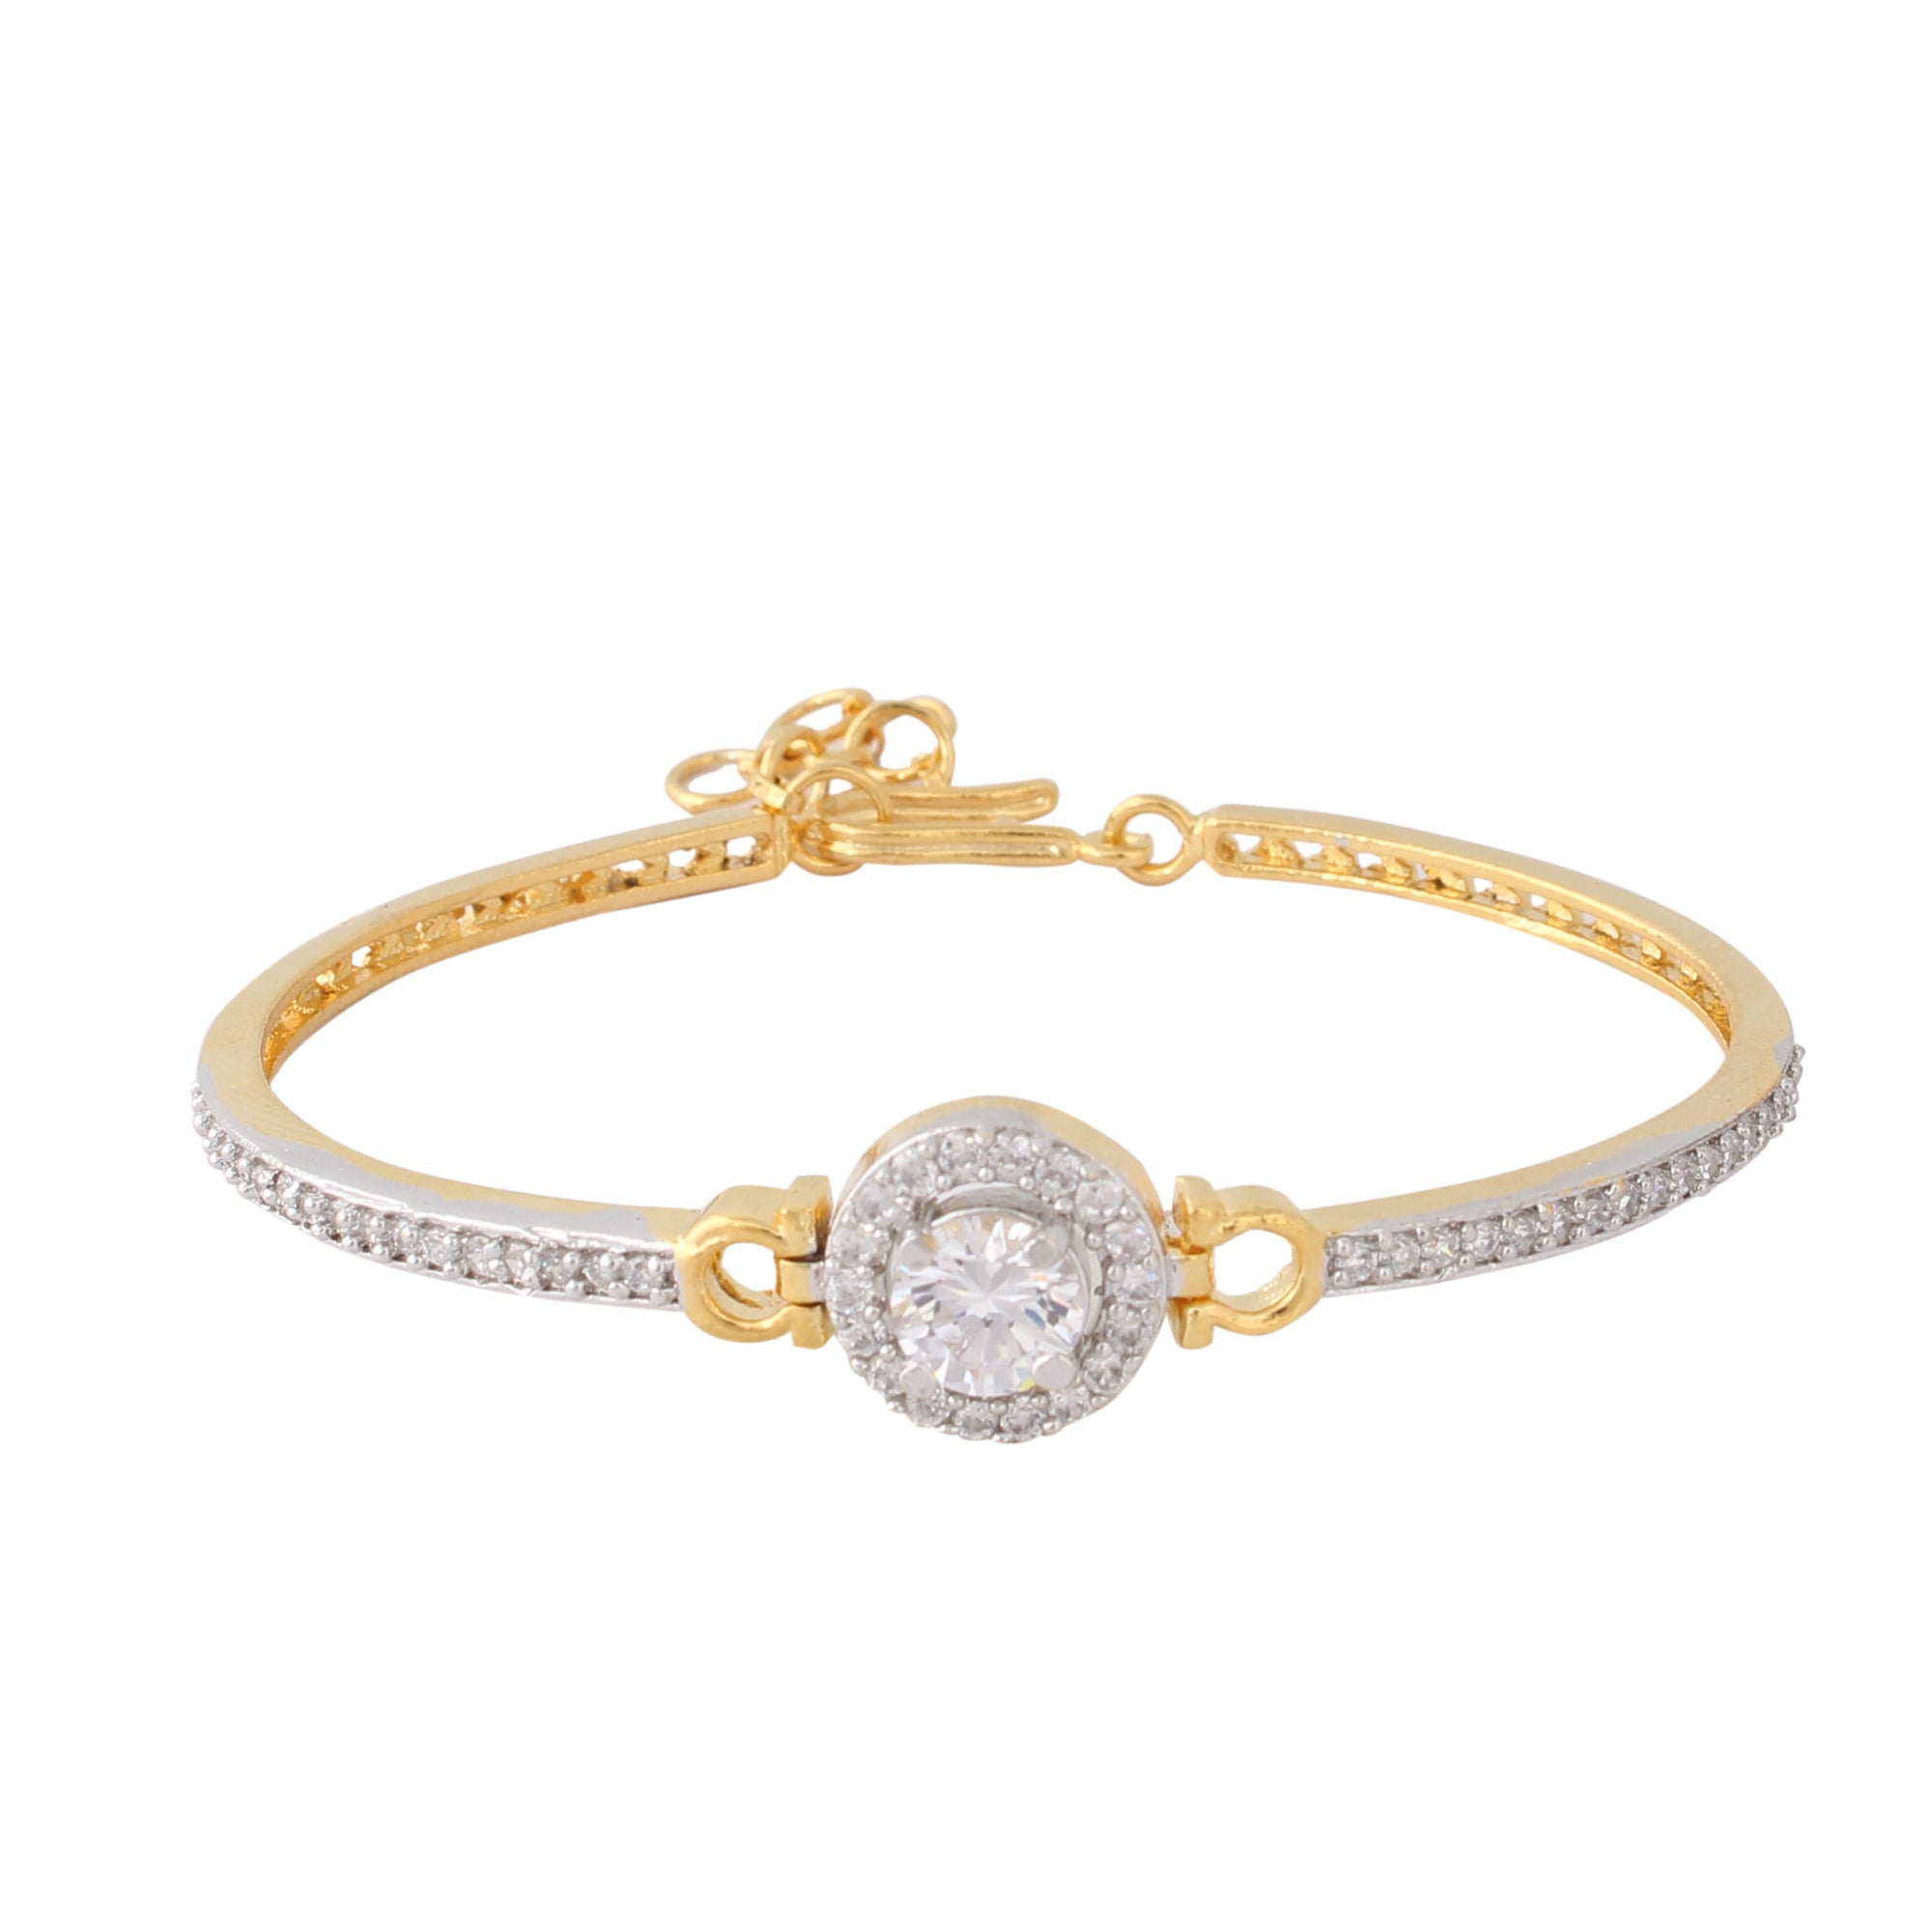 Meira Jewellery Bracelet with  CZ diamond Solitaire in Pave Setting for Women